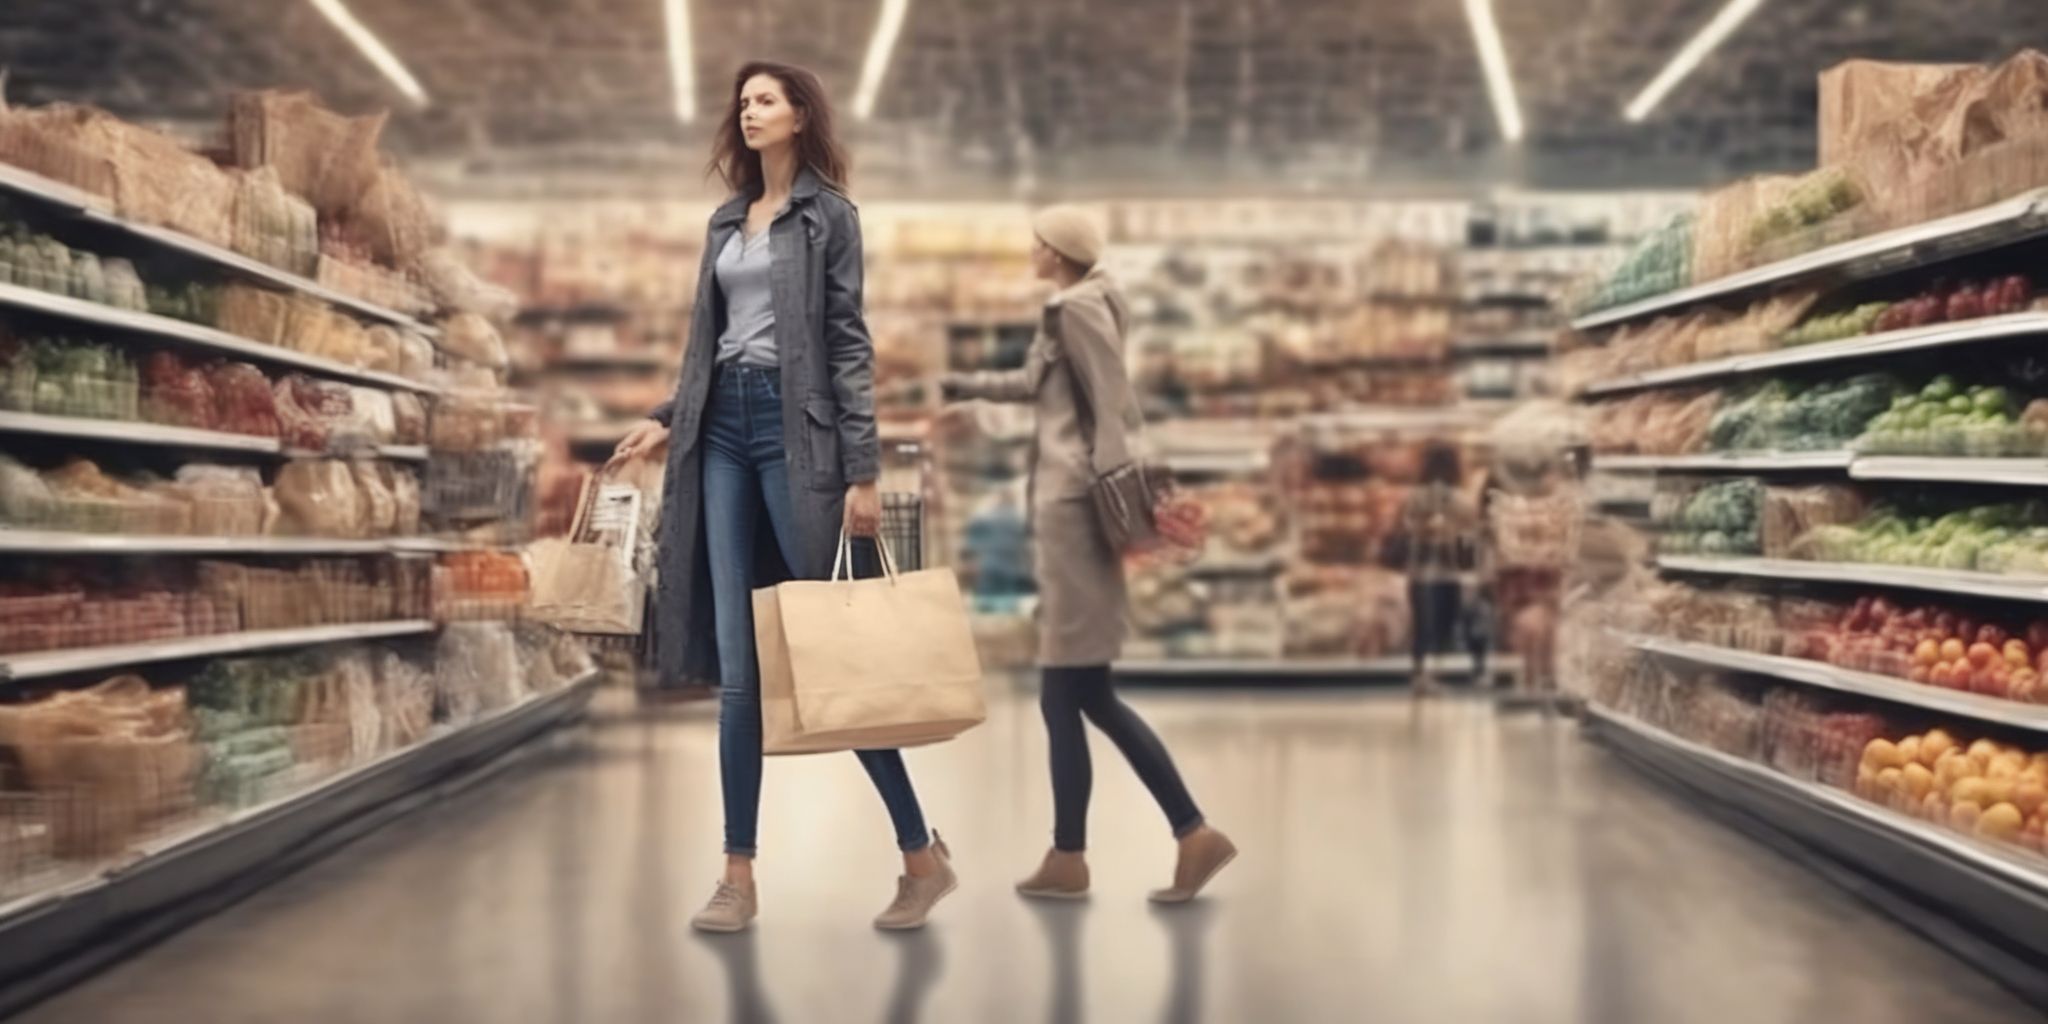 Shopper  in realistic, photographic style